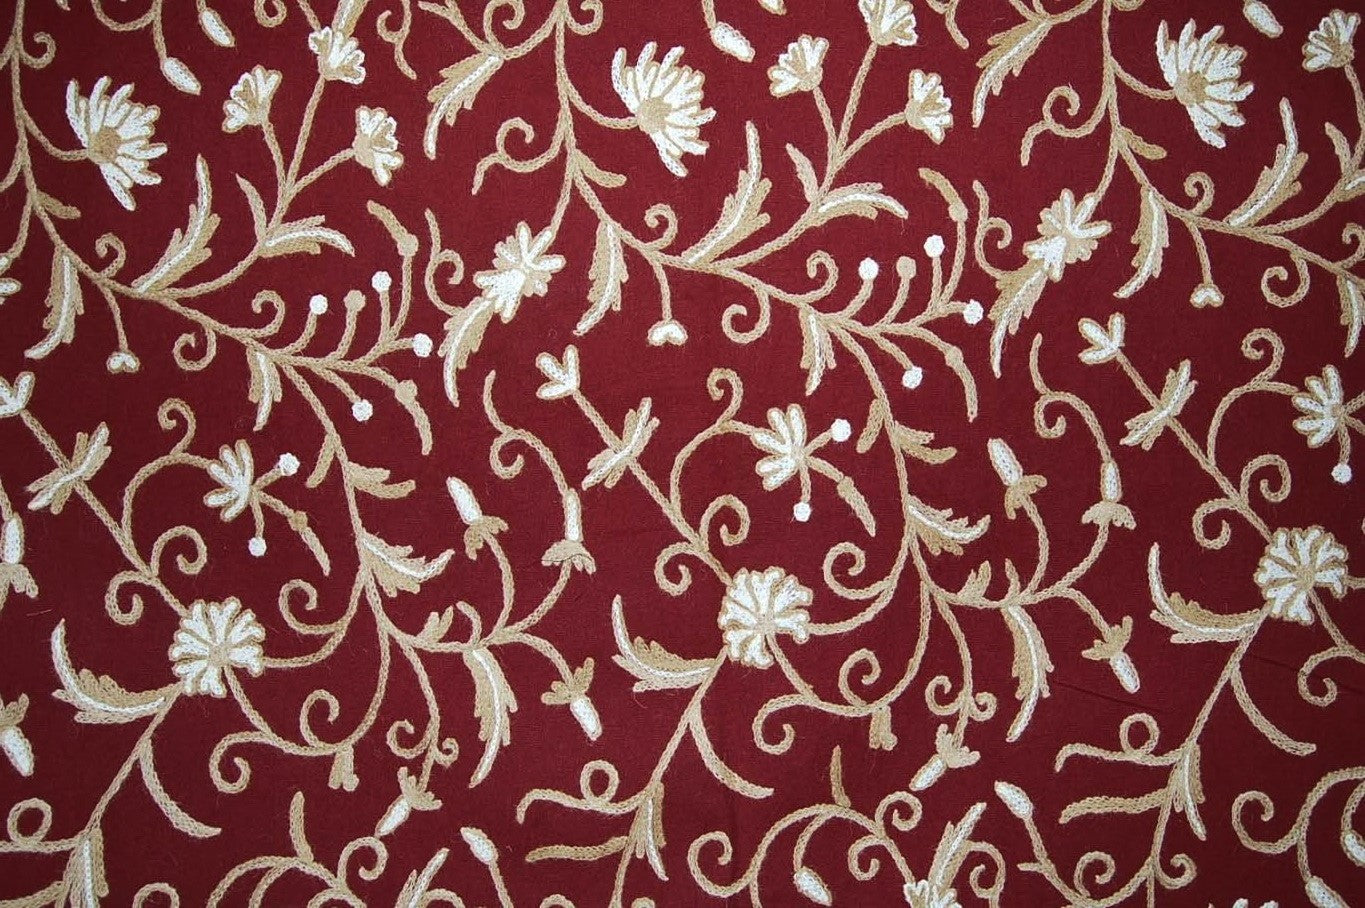 Cotton Crewel Embroidered Fabric Jacobean Maroon, Beige and White #TML202